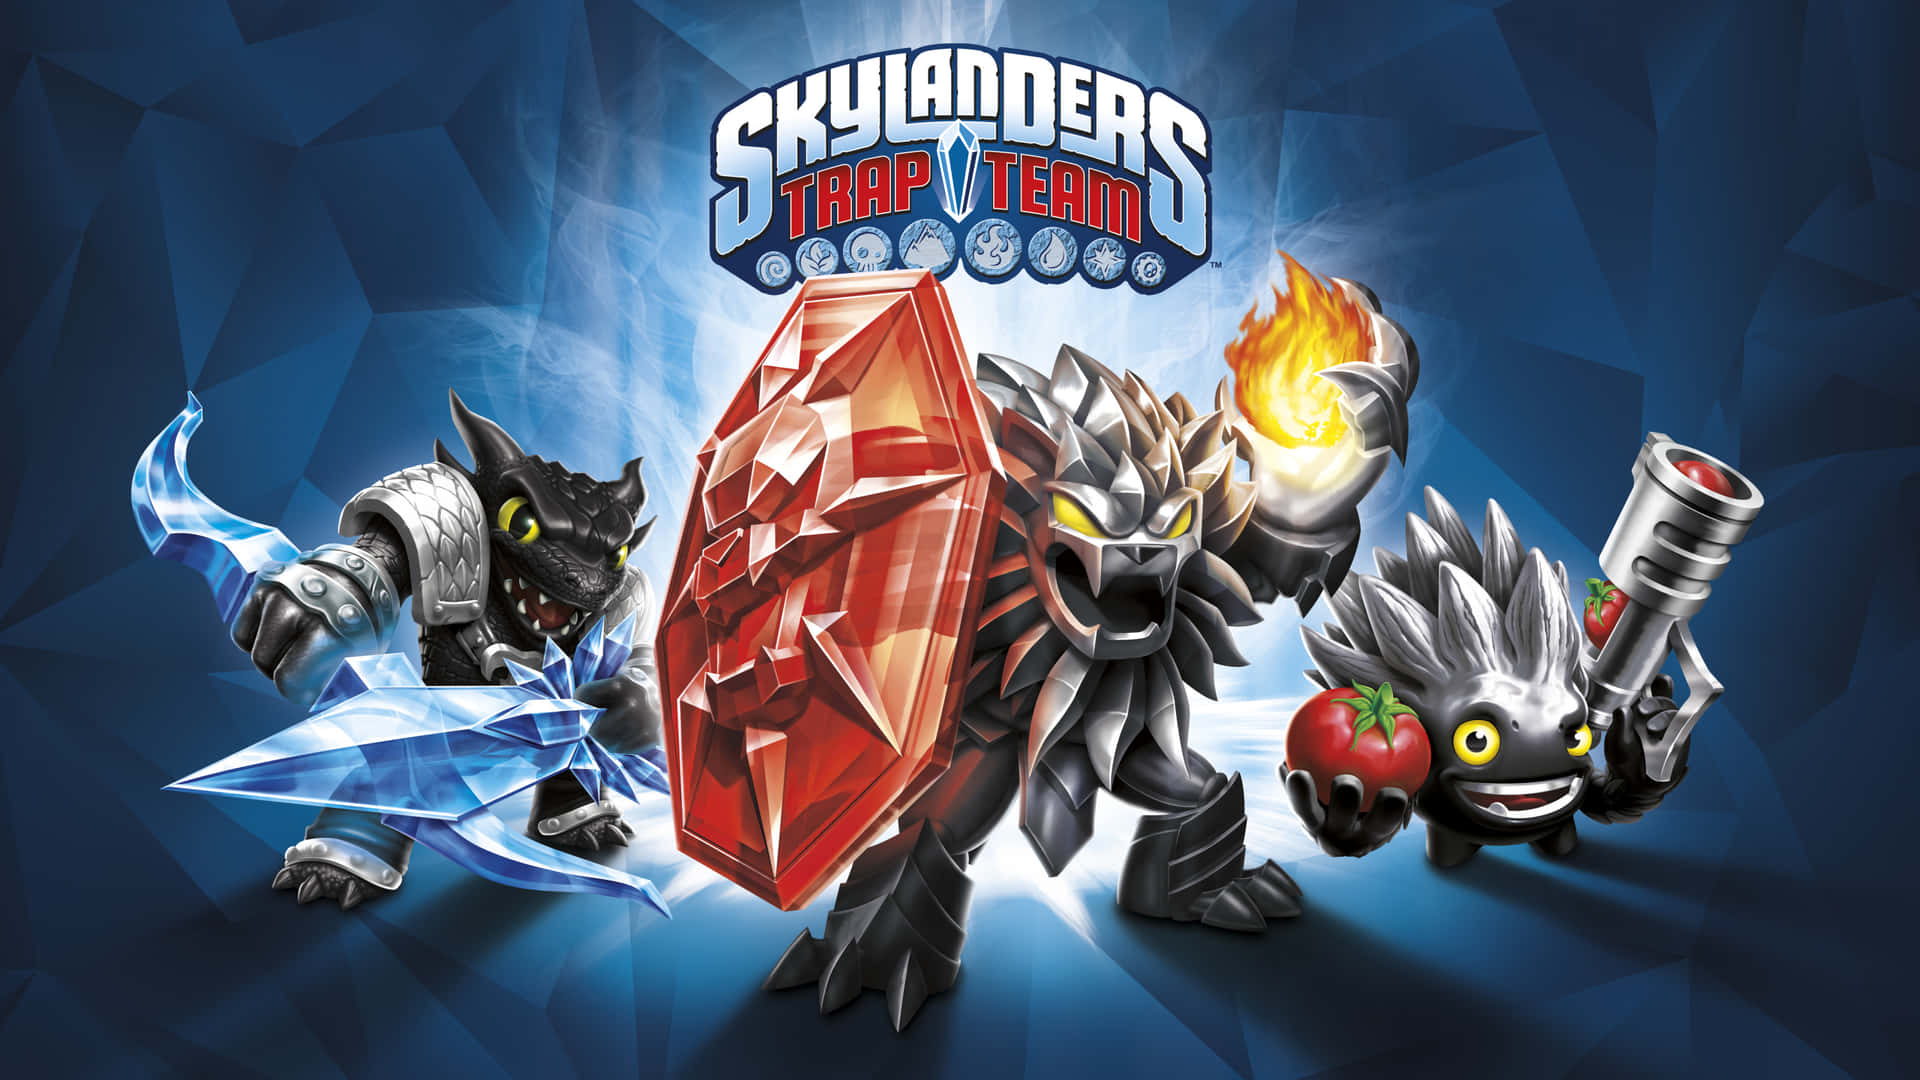 Welcome To The World of Skylanders Wallpaper